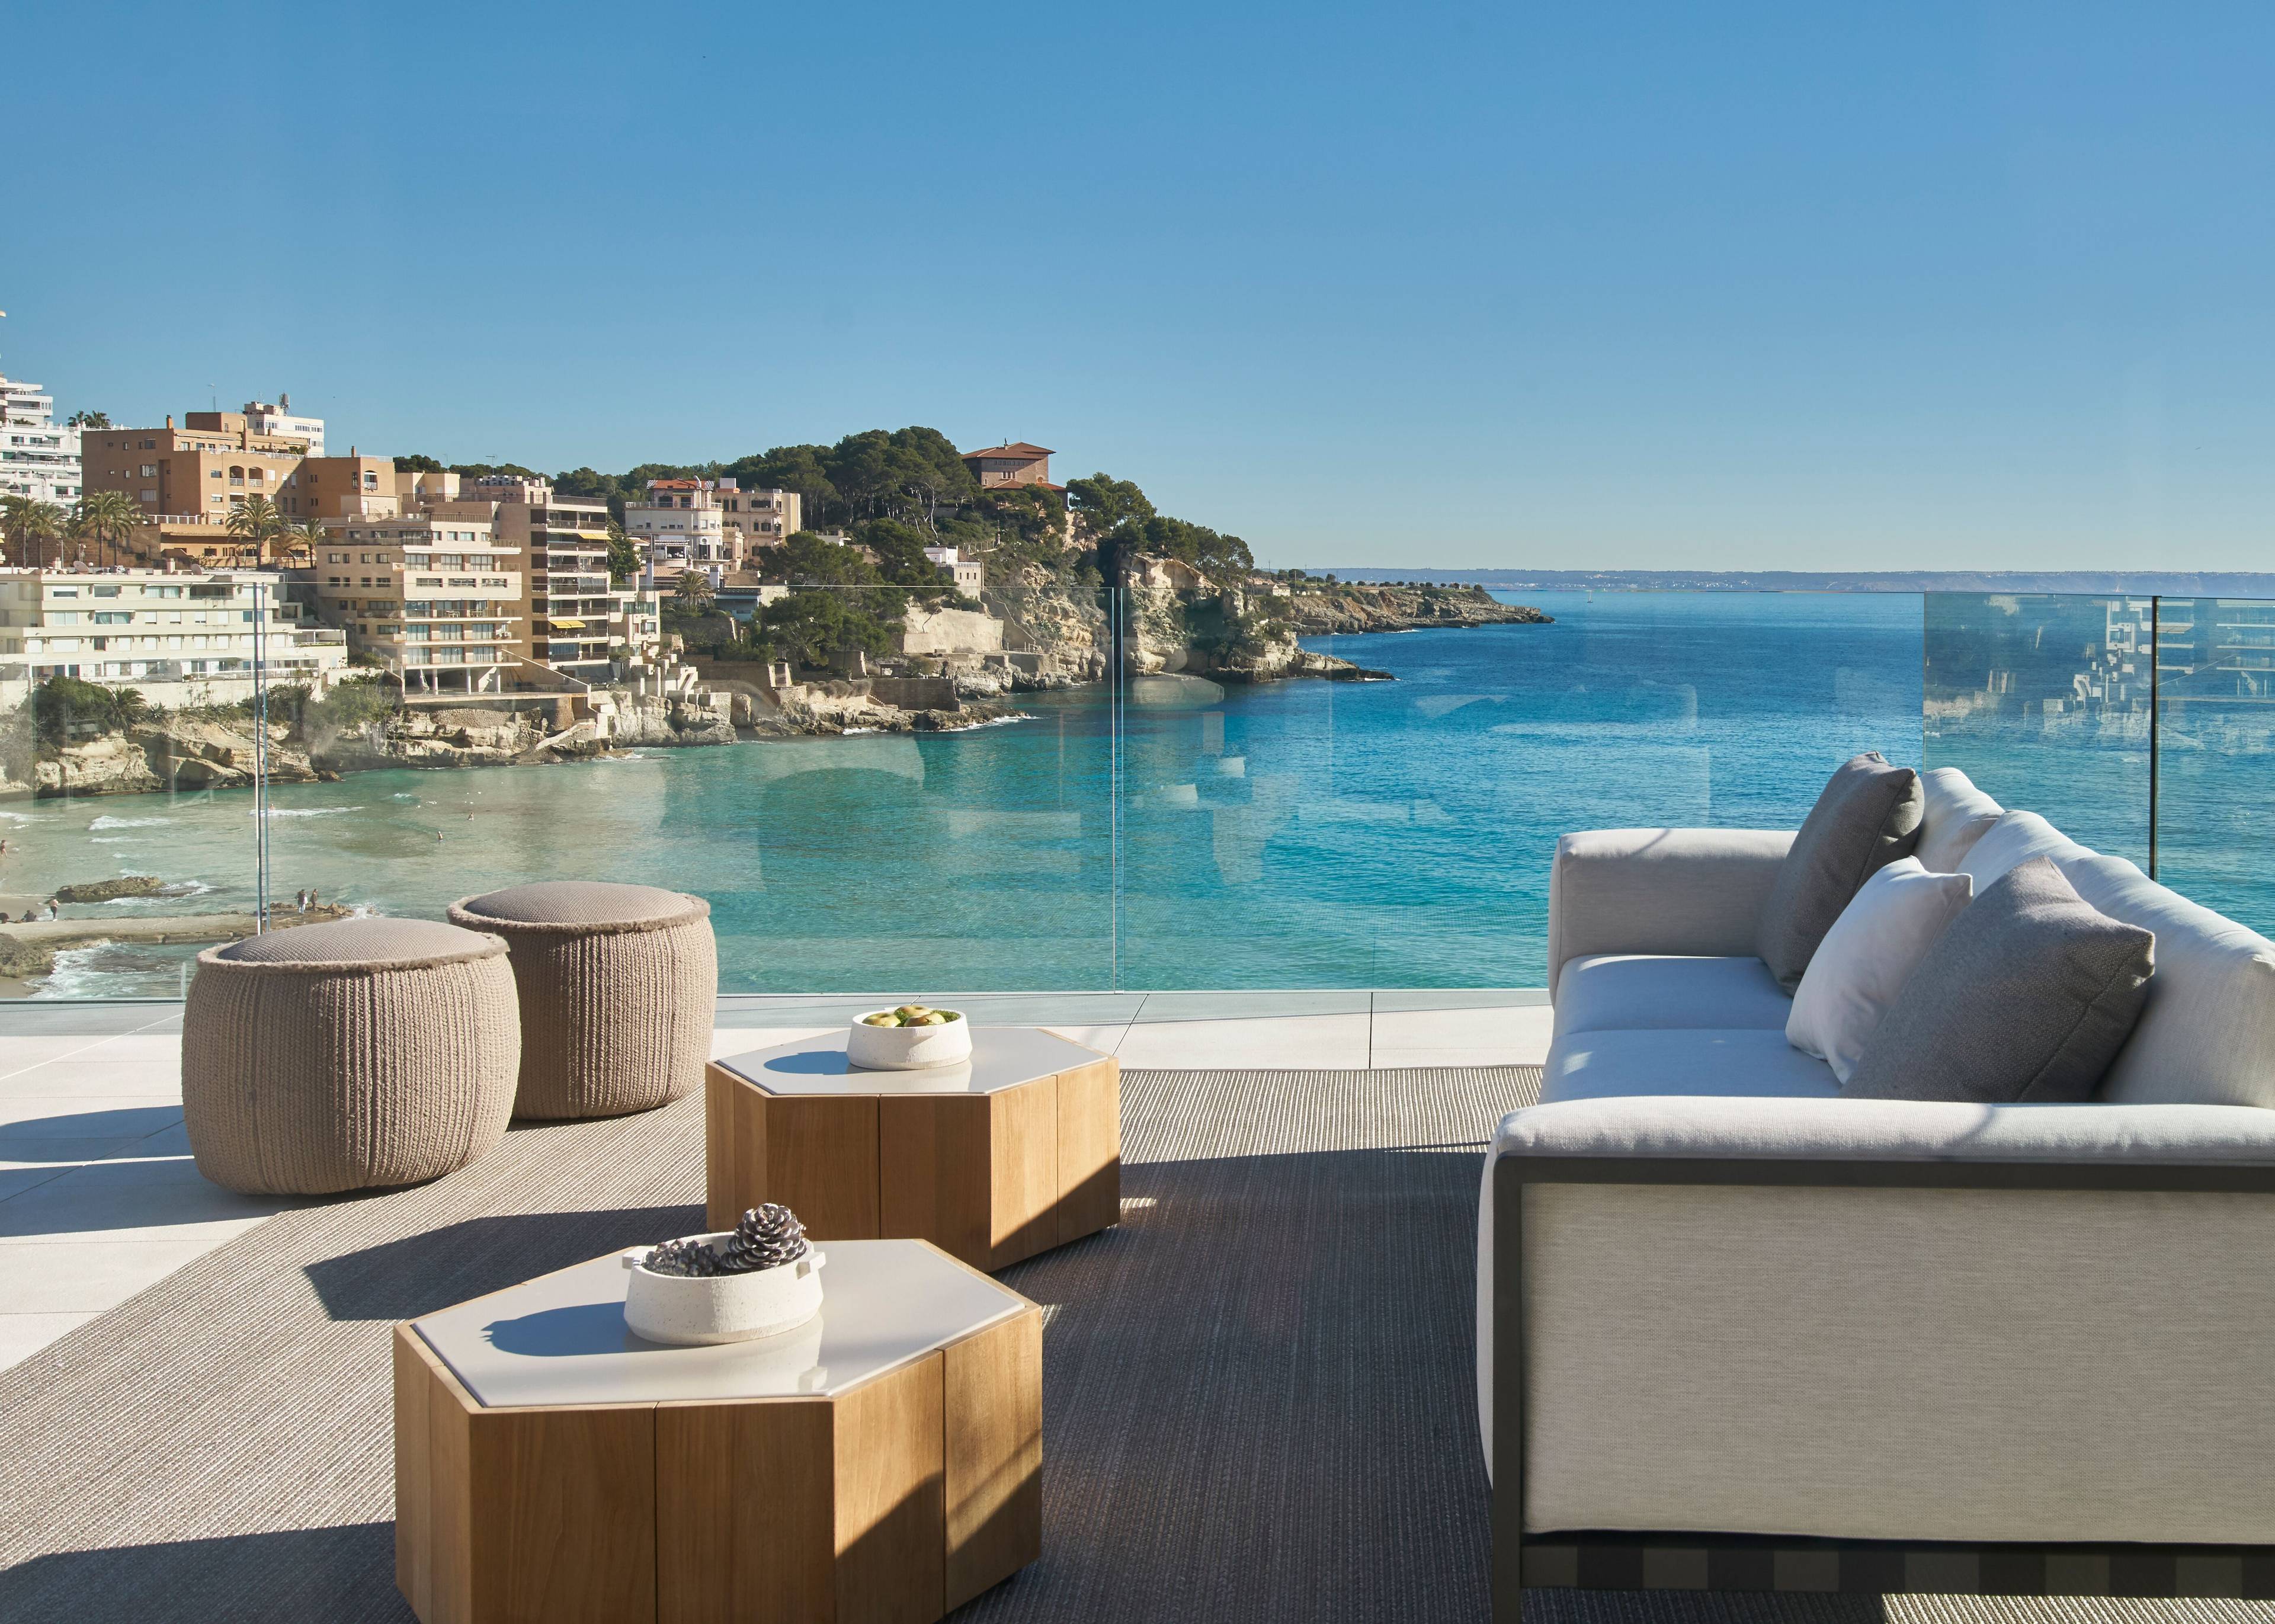 NEWLY BUILT PENTHOUSE BY THE SEA HAS AMAZING VIEWS OF CALA MAYOR